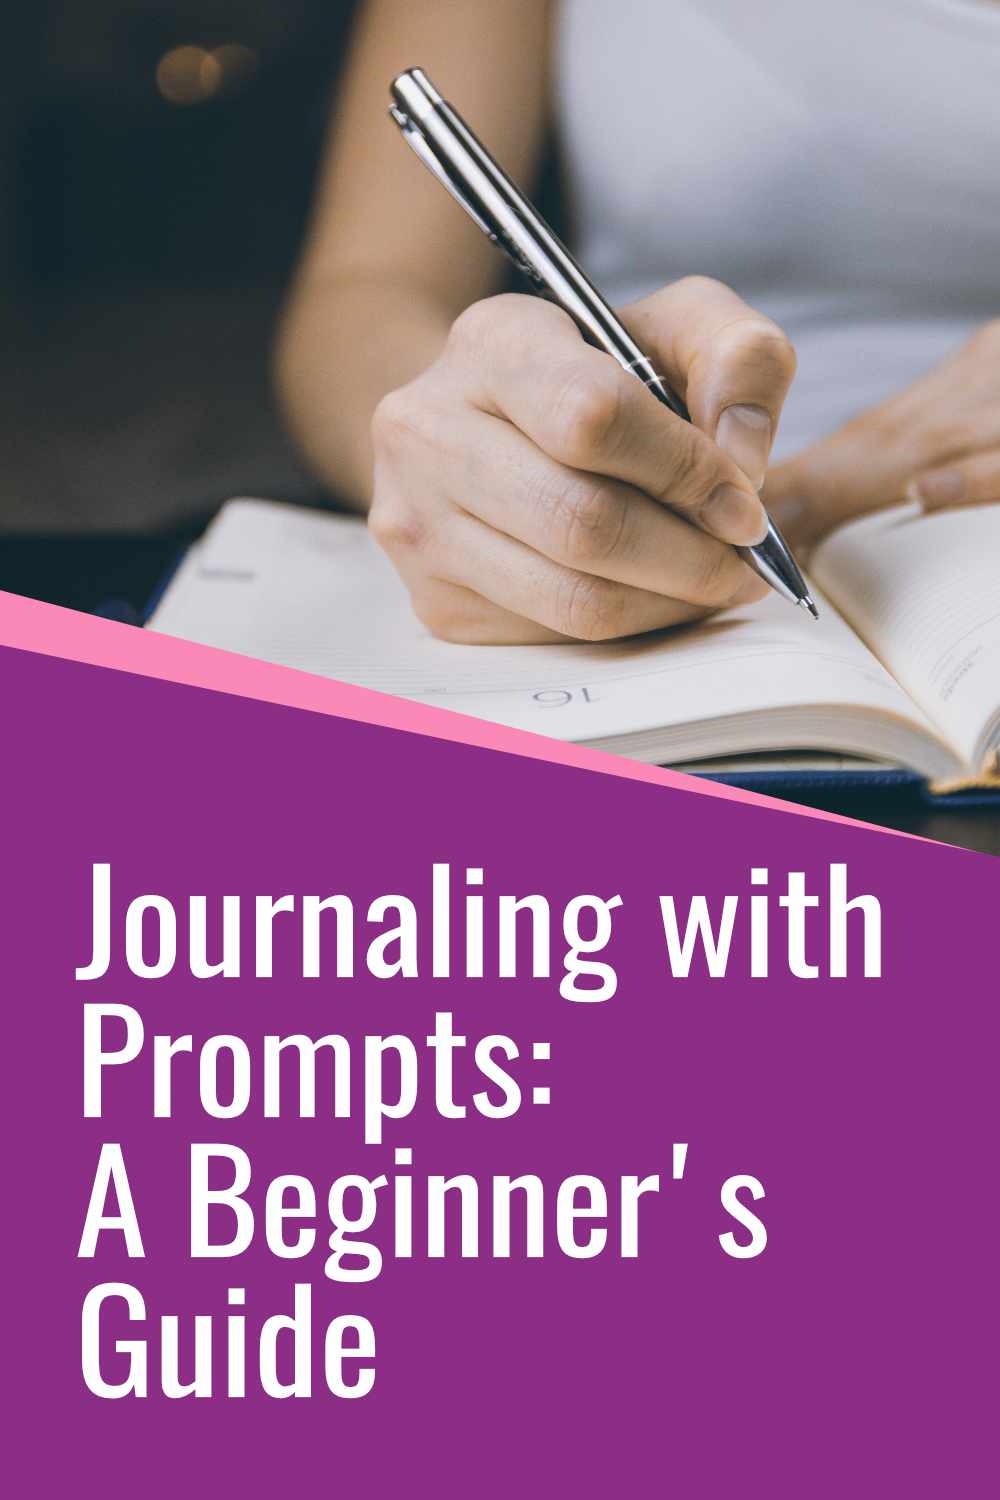 A social media image saying Journaling with prompts: a beginner's guide